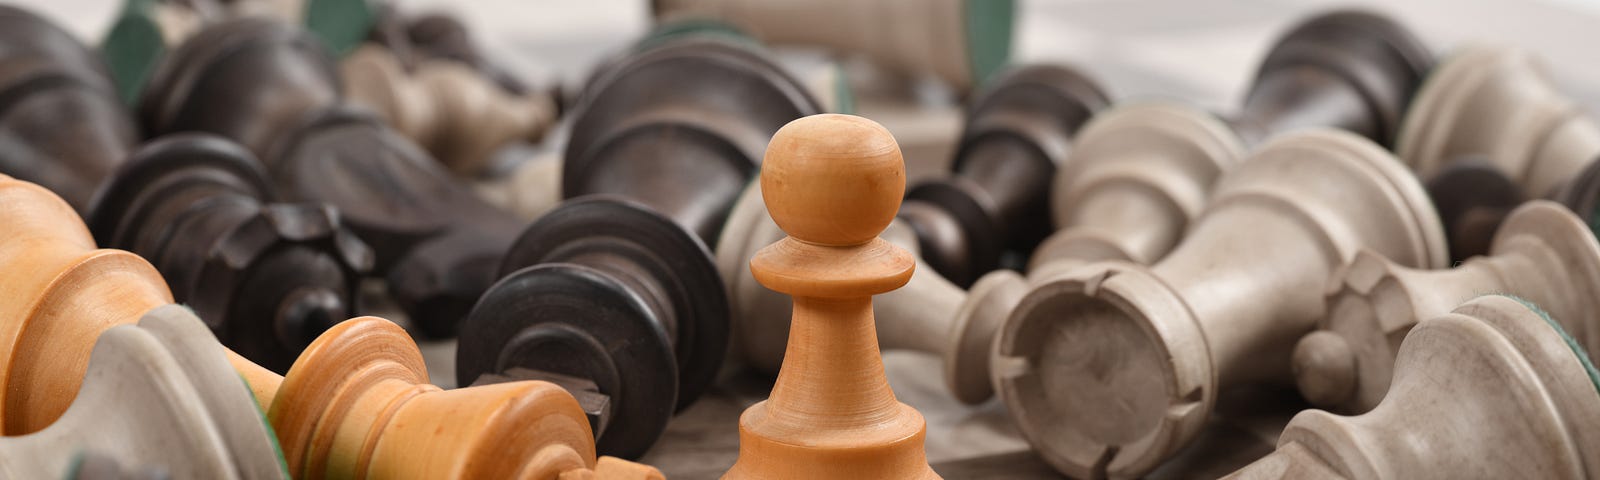 How chess makes you a better designer, by Aishwarya Rao